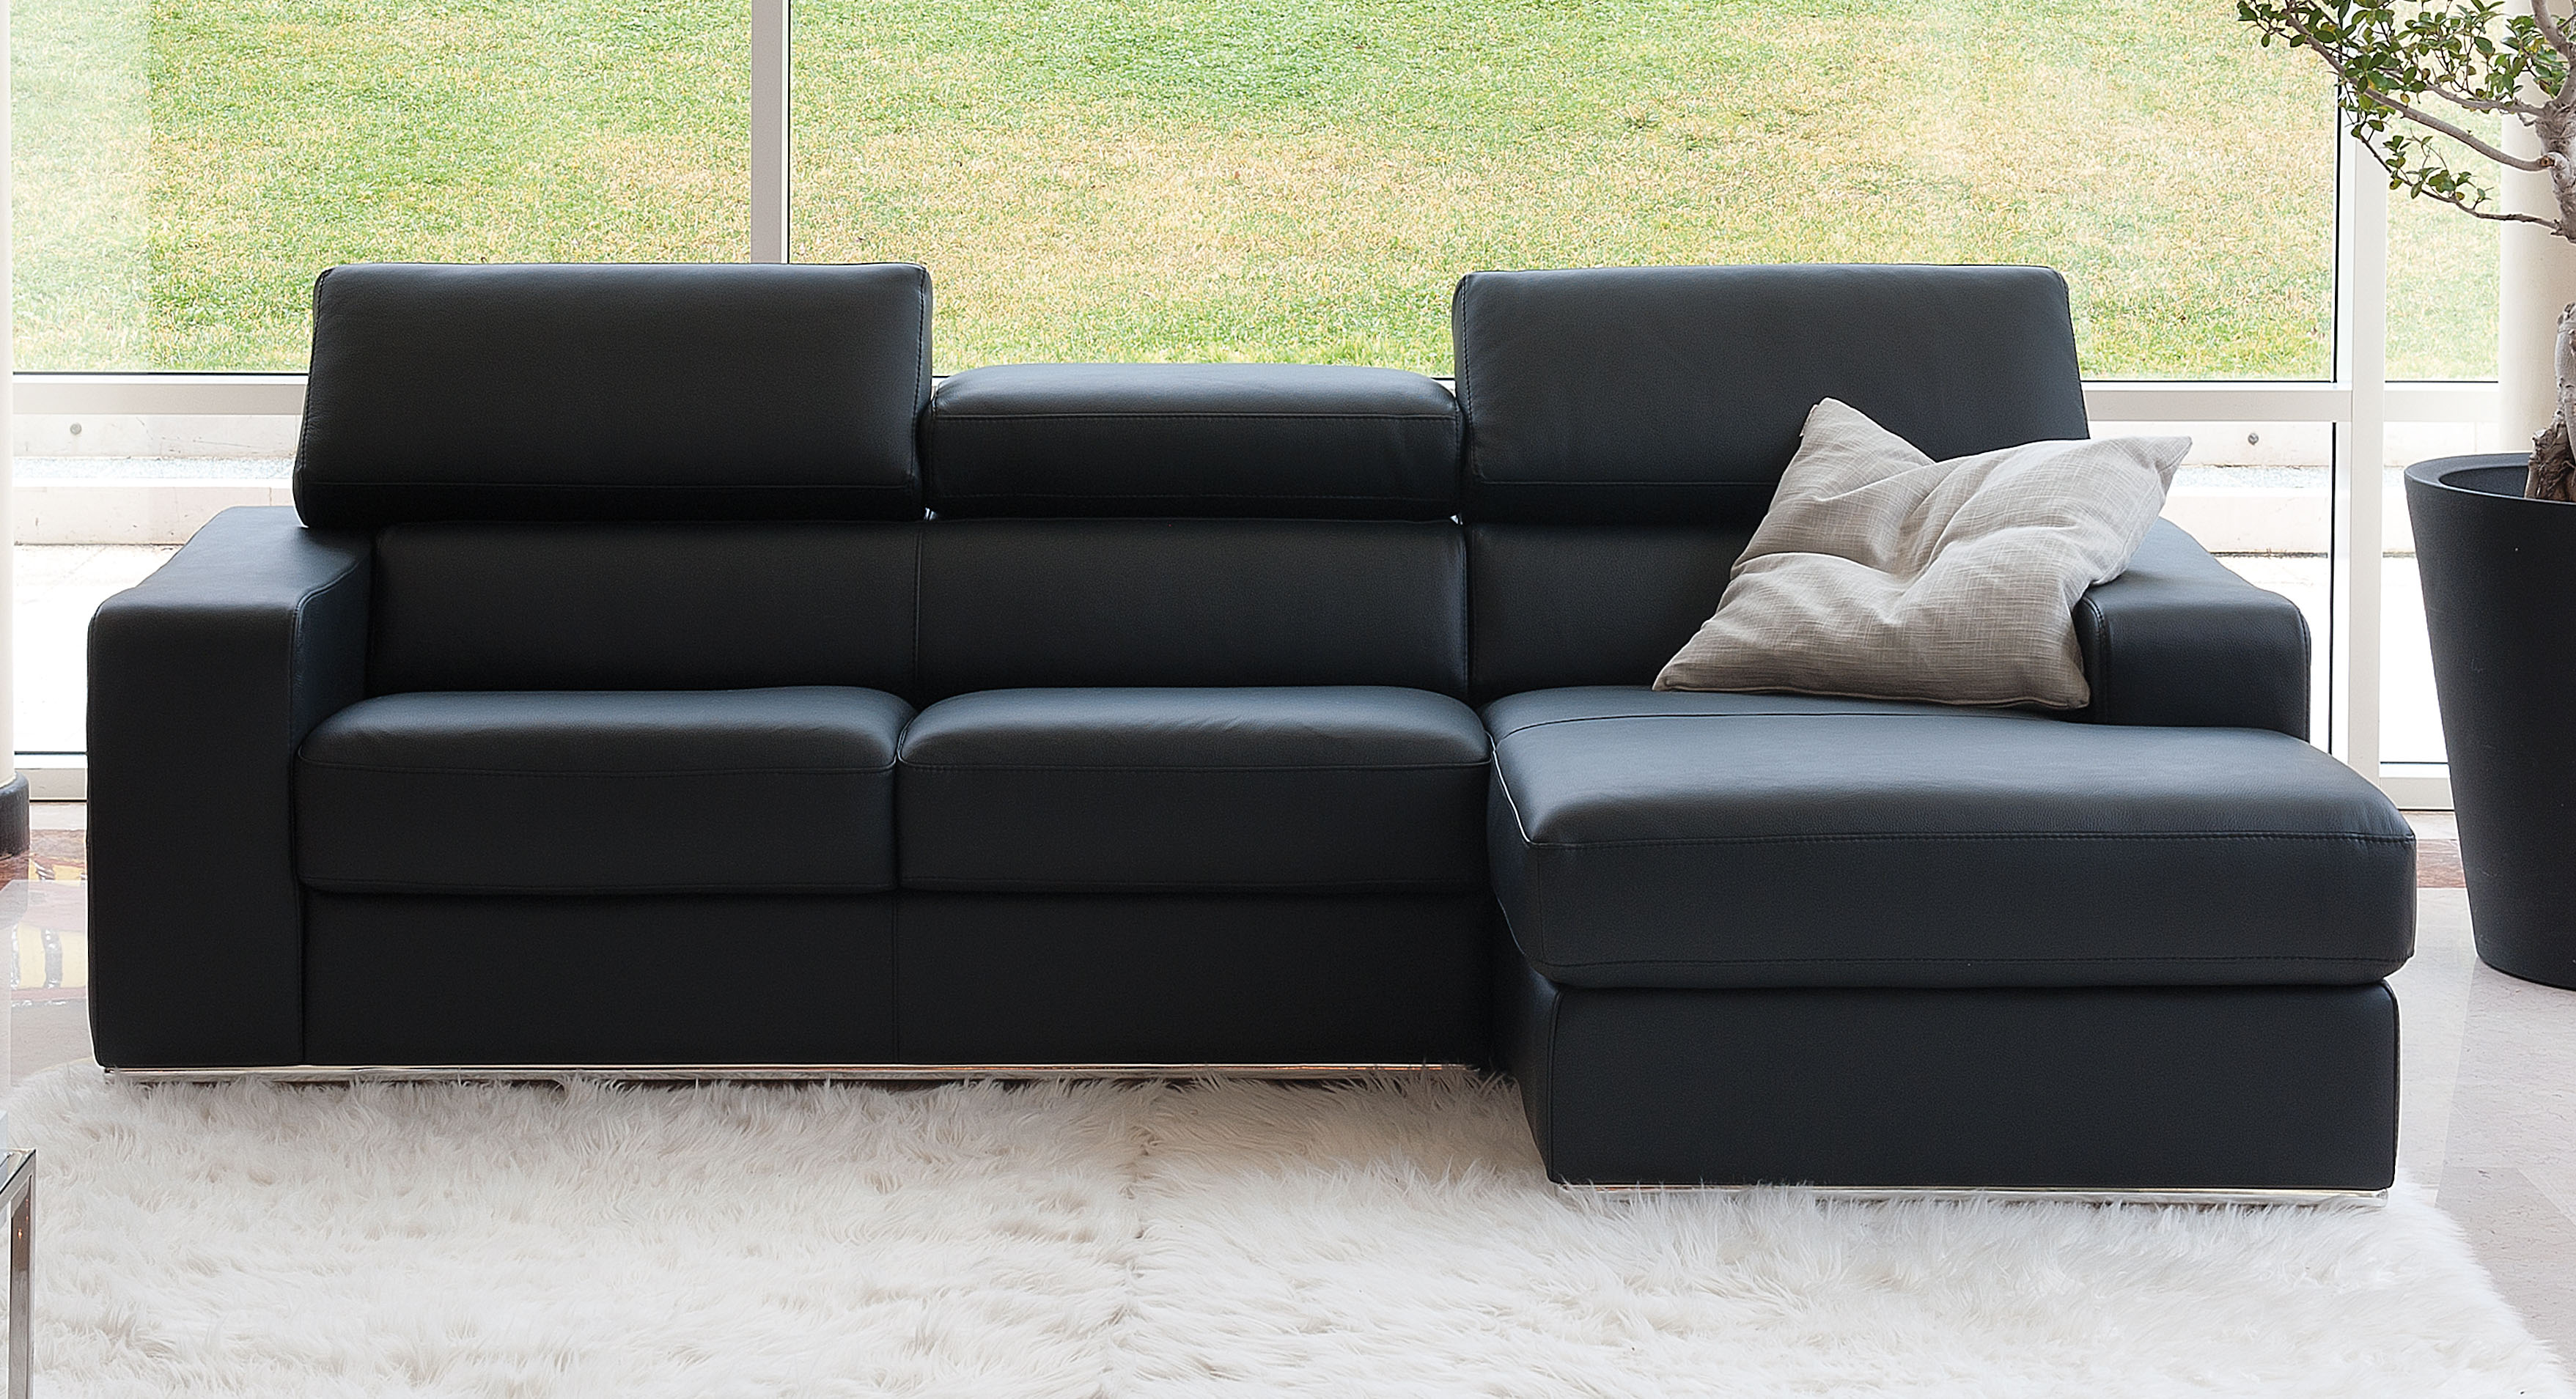 Advanced Adjustable Covered in All Leather Sectional with Pillows - Click Image to Close